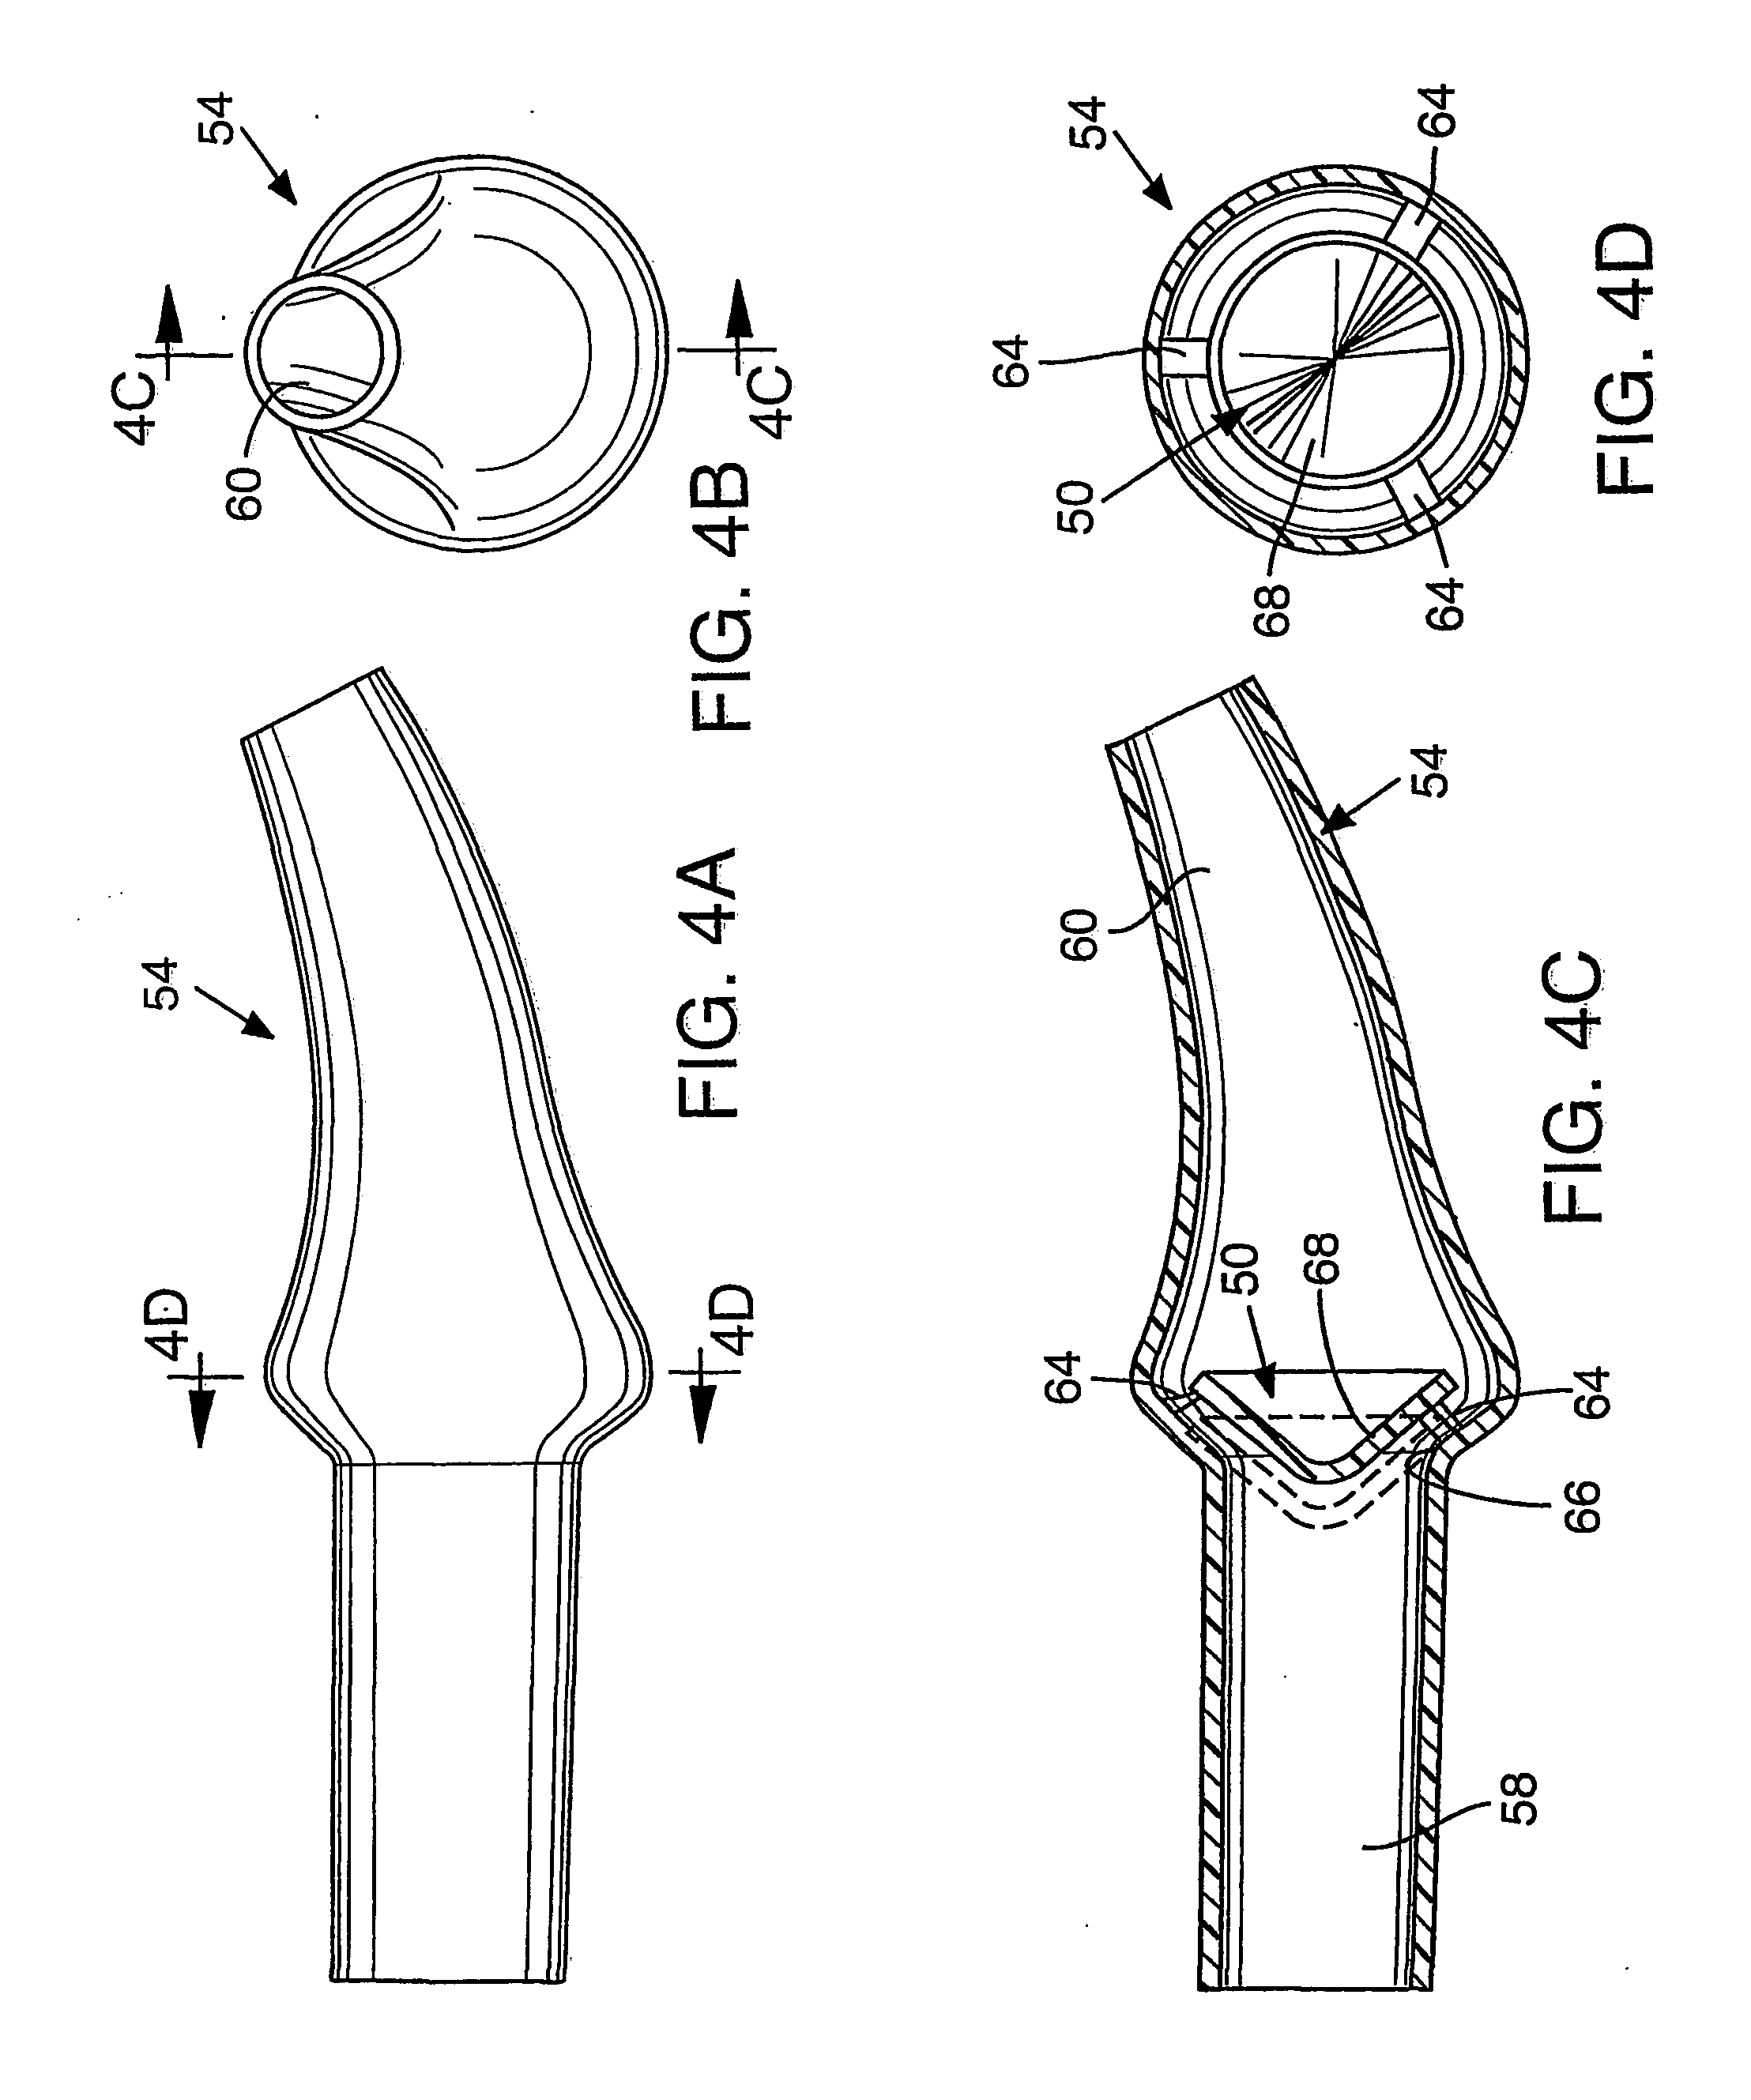 Systems and methods for aerosol delivery of agents